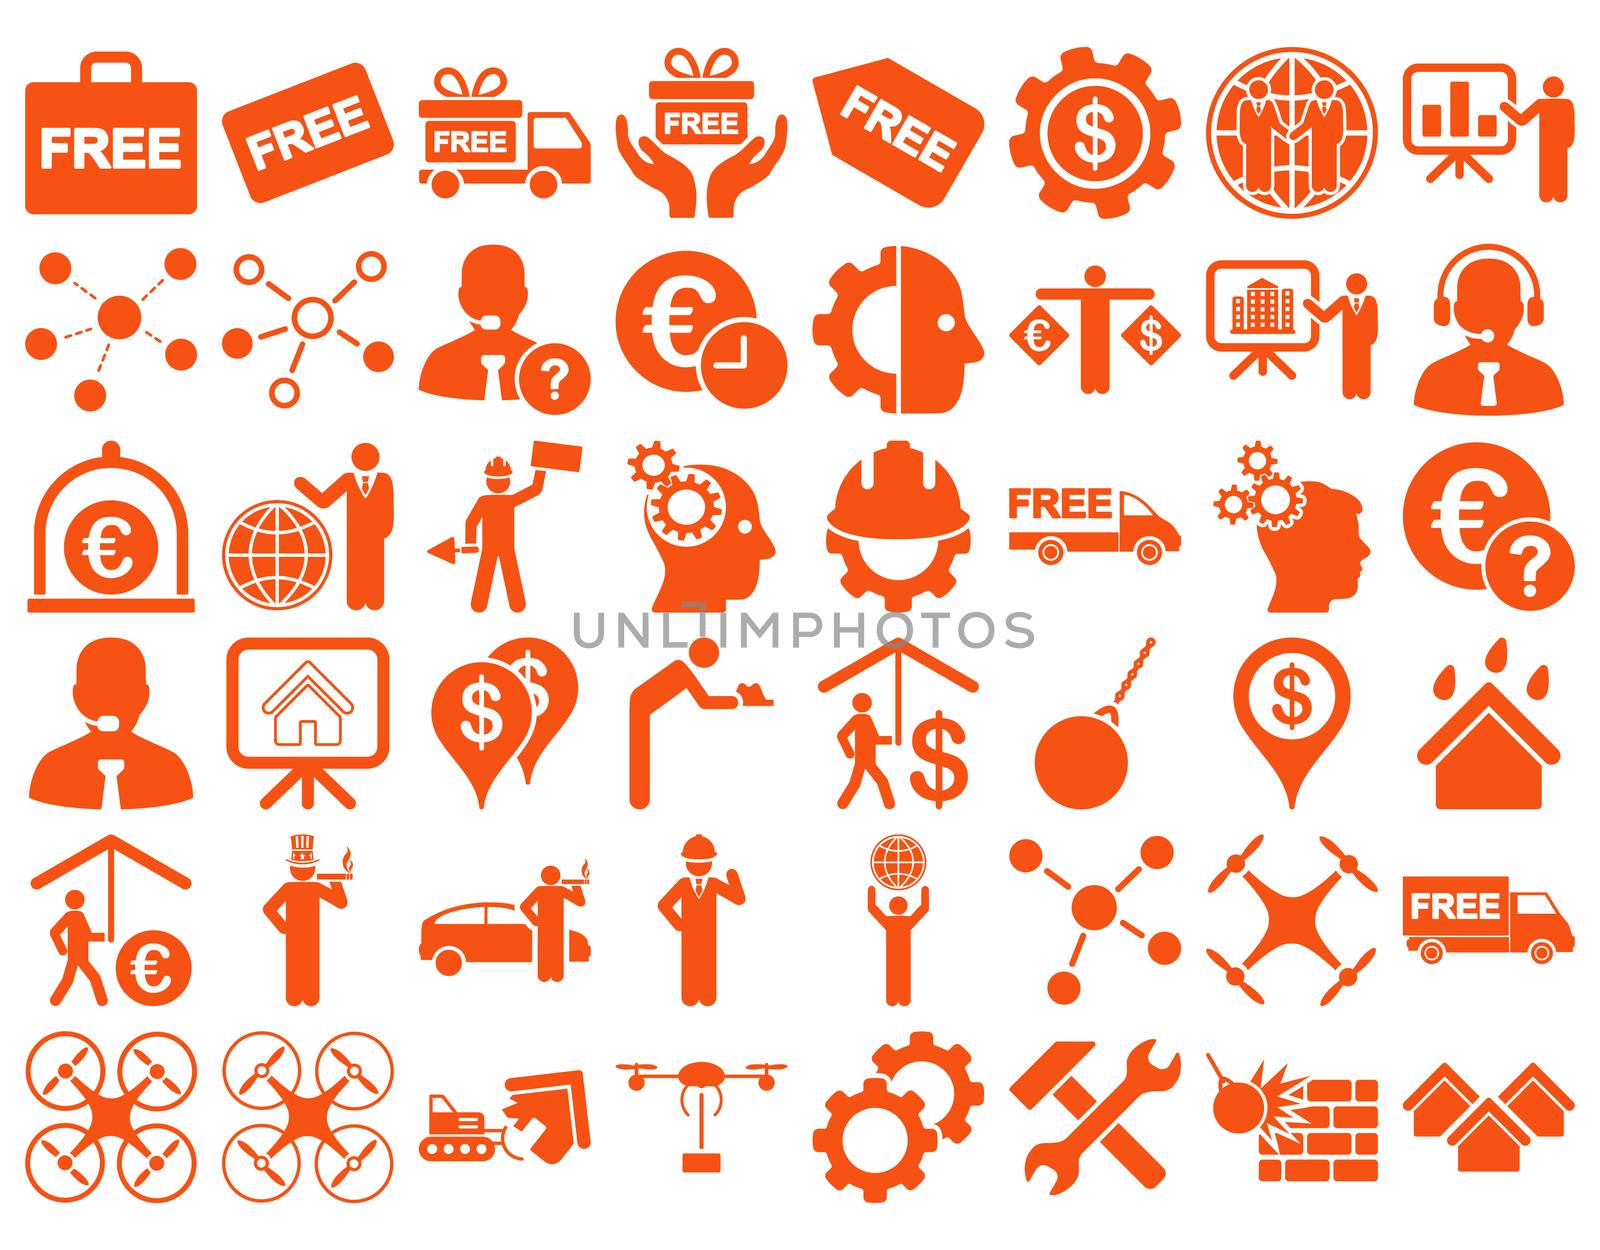 Business Icon Set. These flat icons use orange color. Raster images are isolated on a white background.